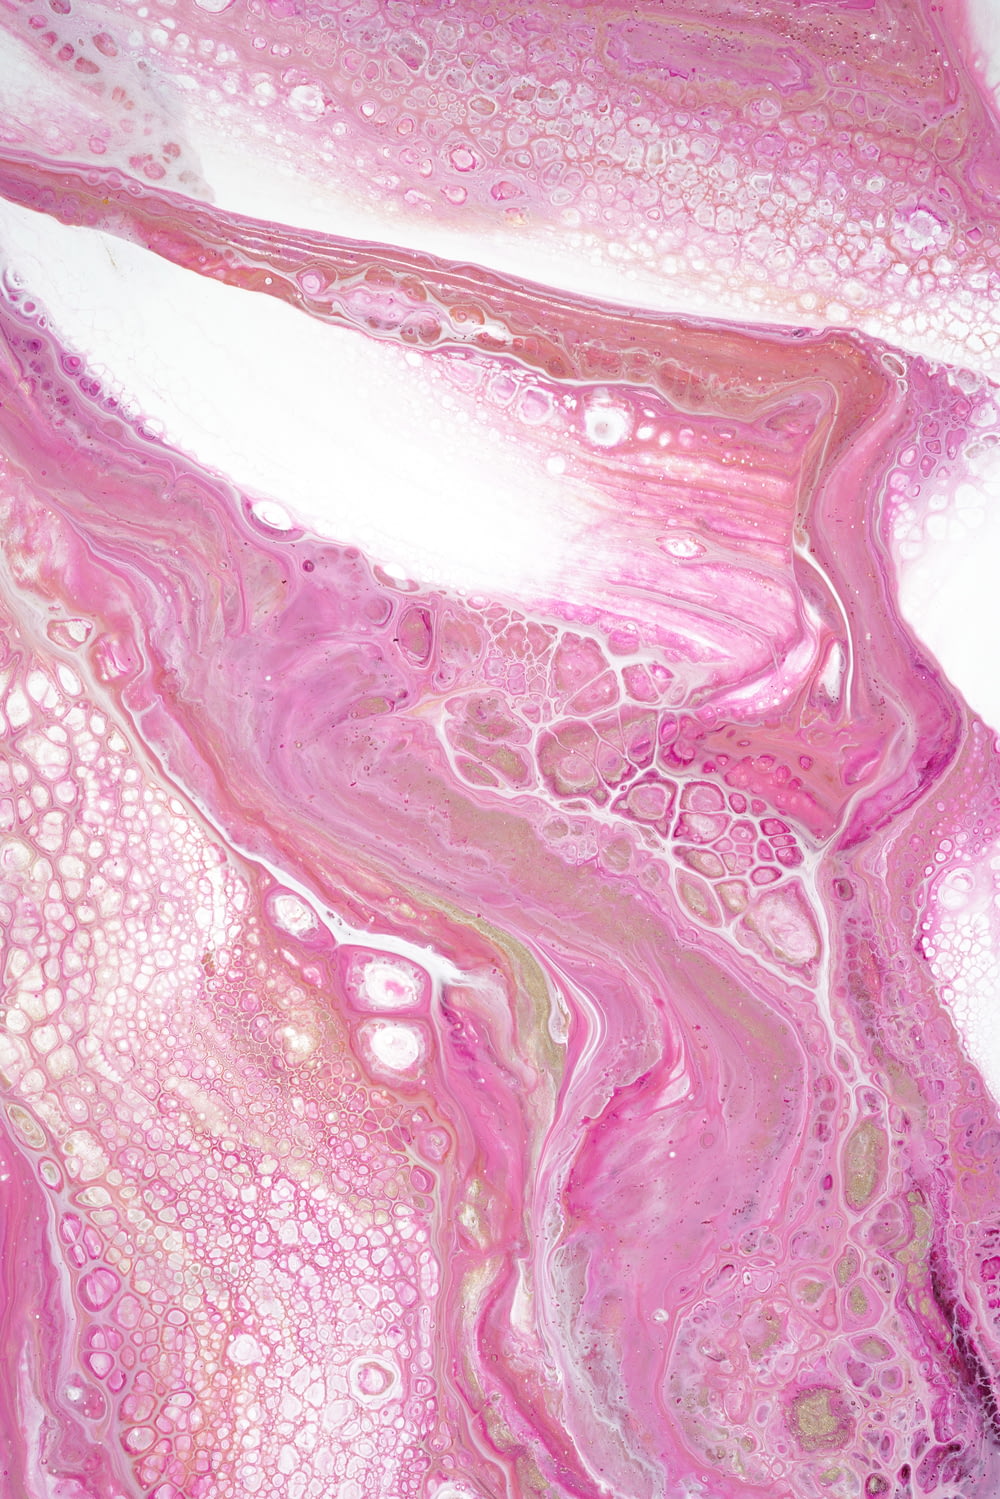 a close up of a pink and white fluid substance